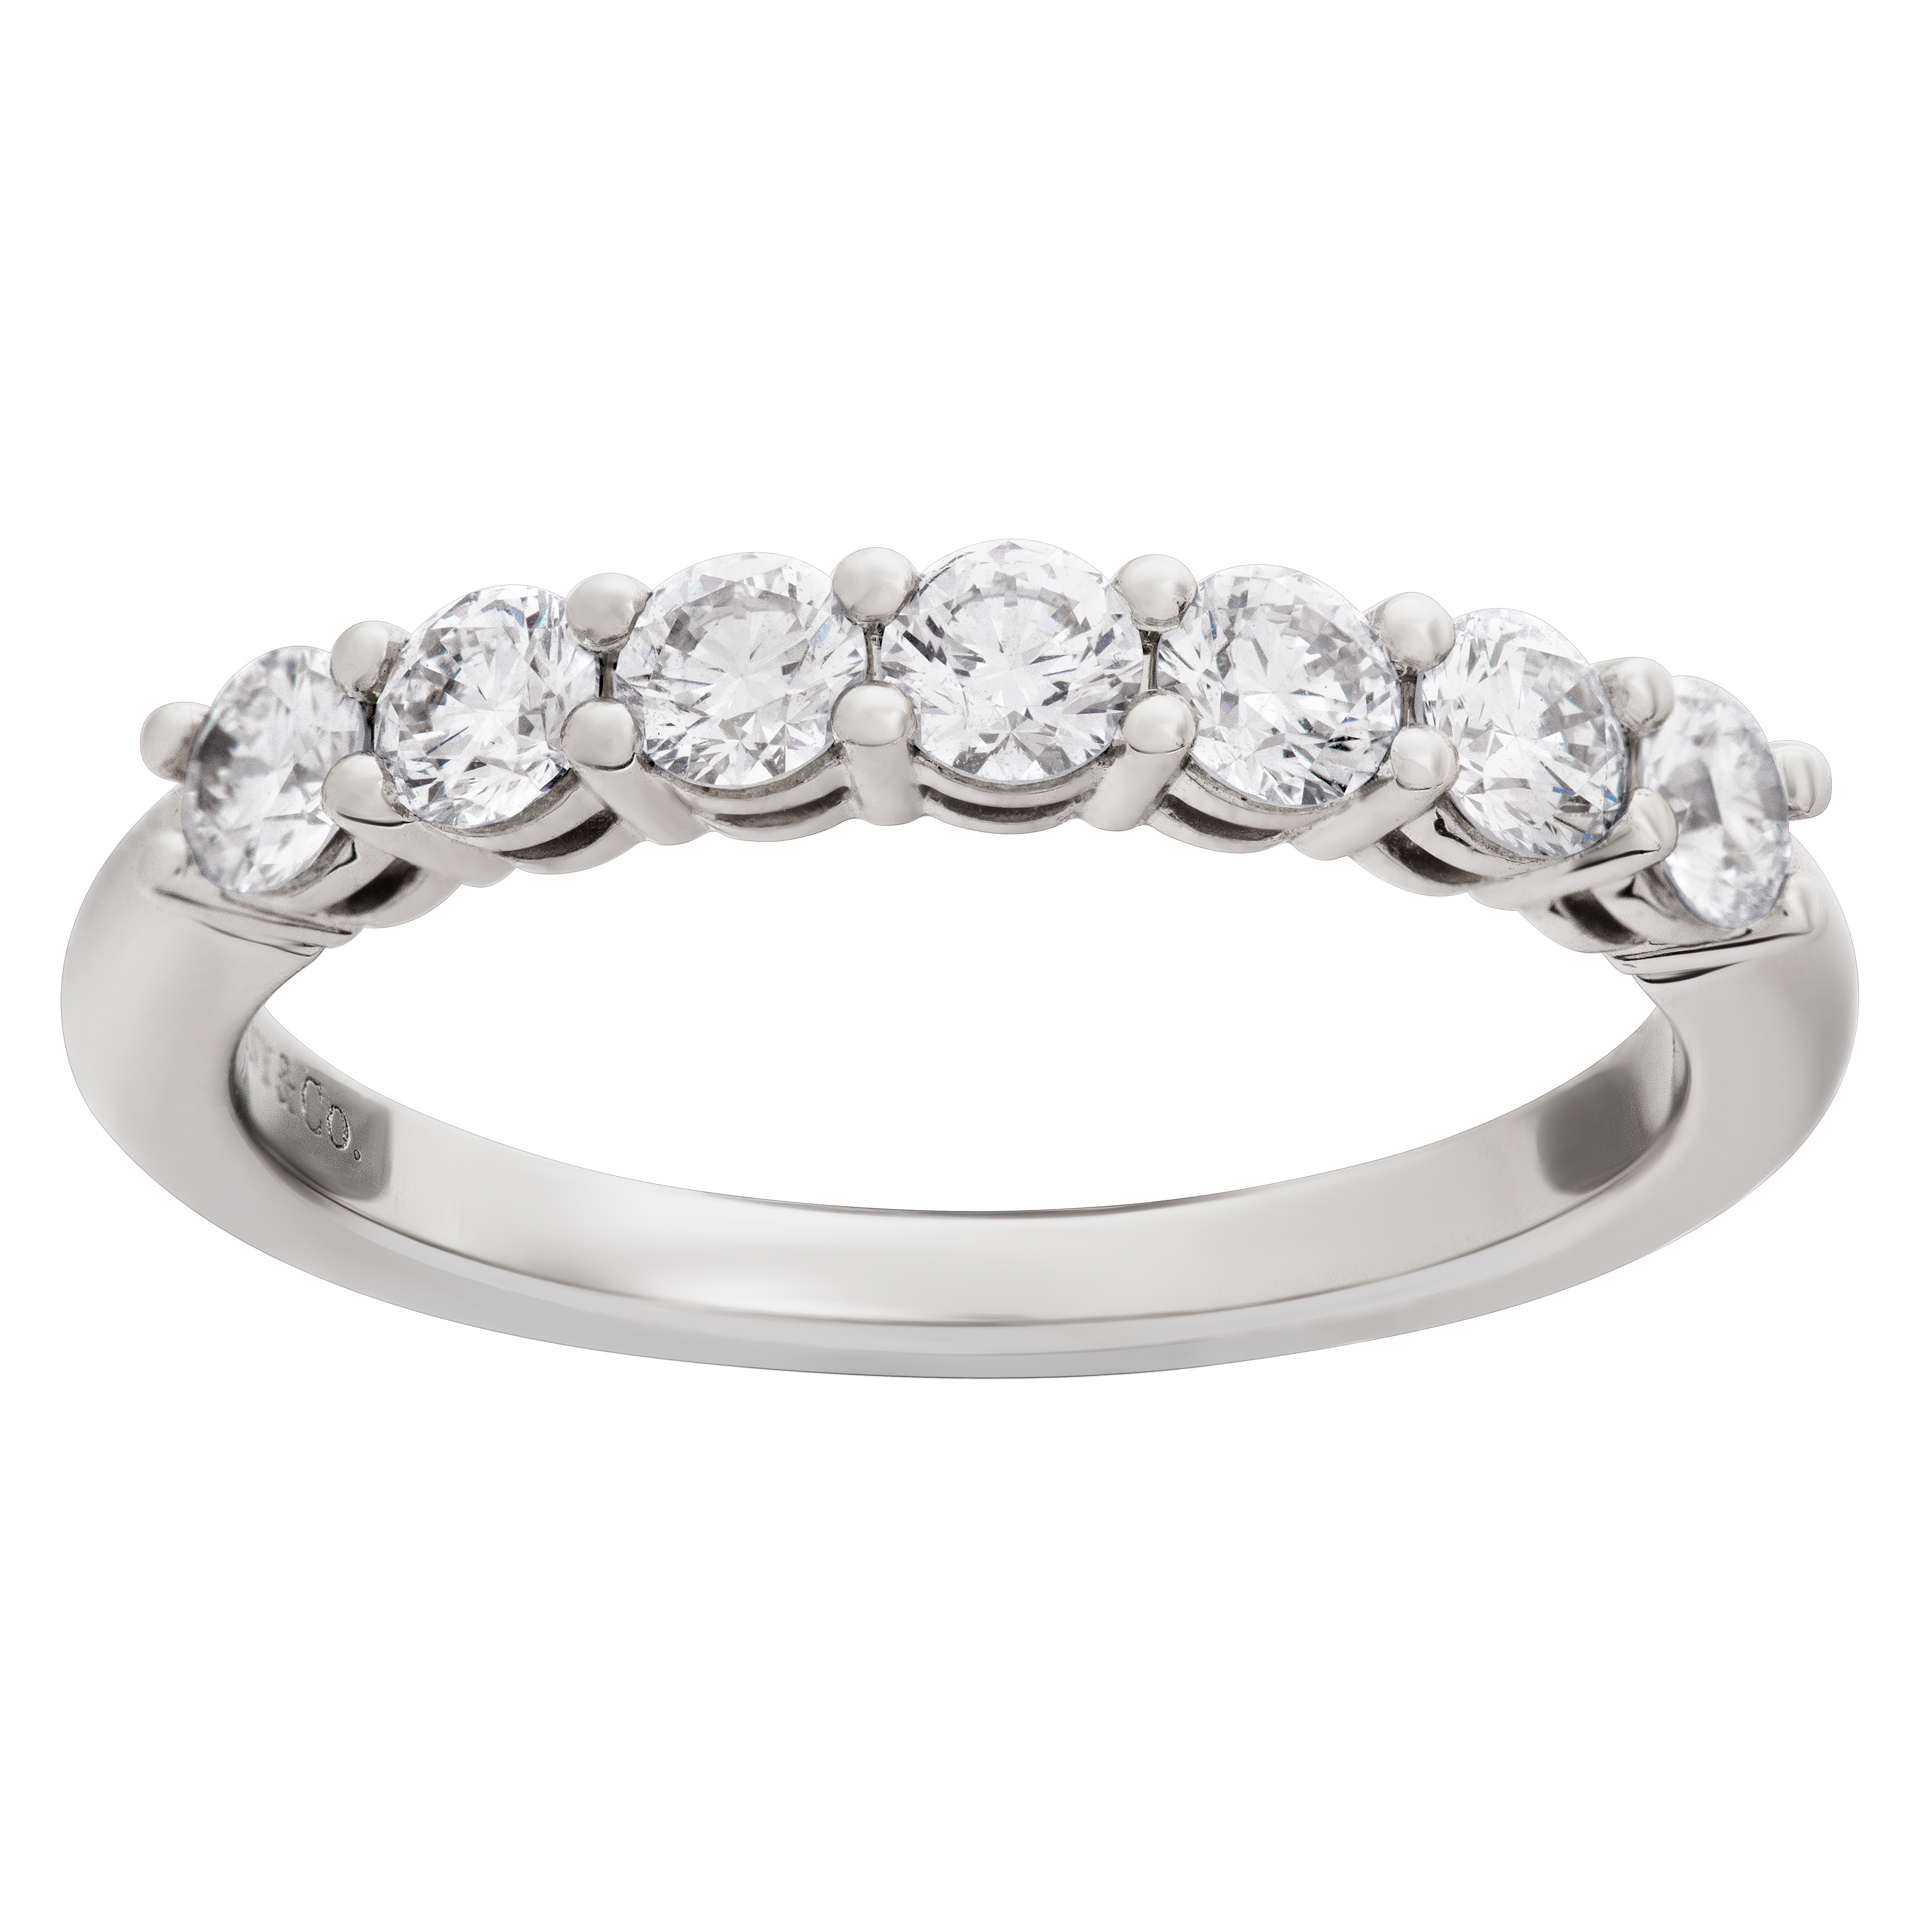 Tiffany & Co. "Embrace" band ring in platinum image 1